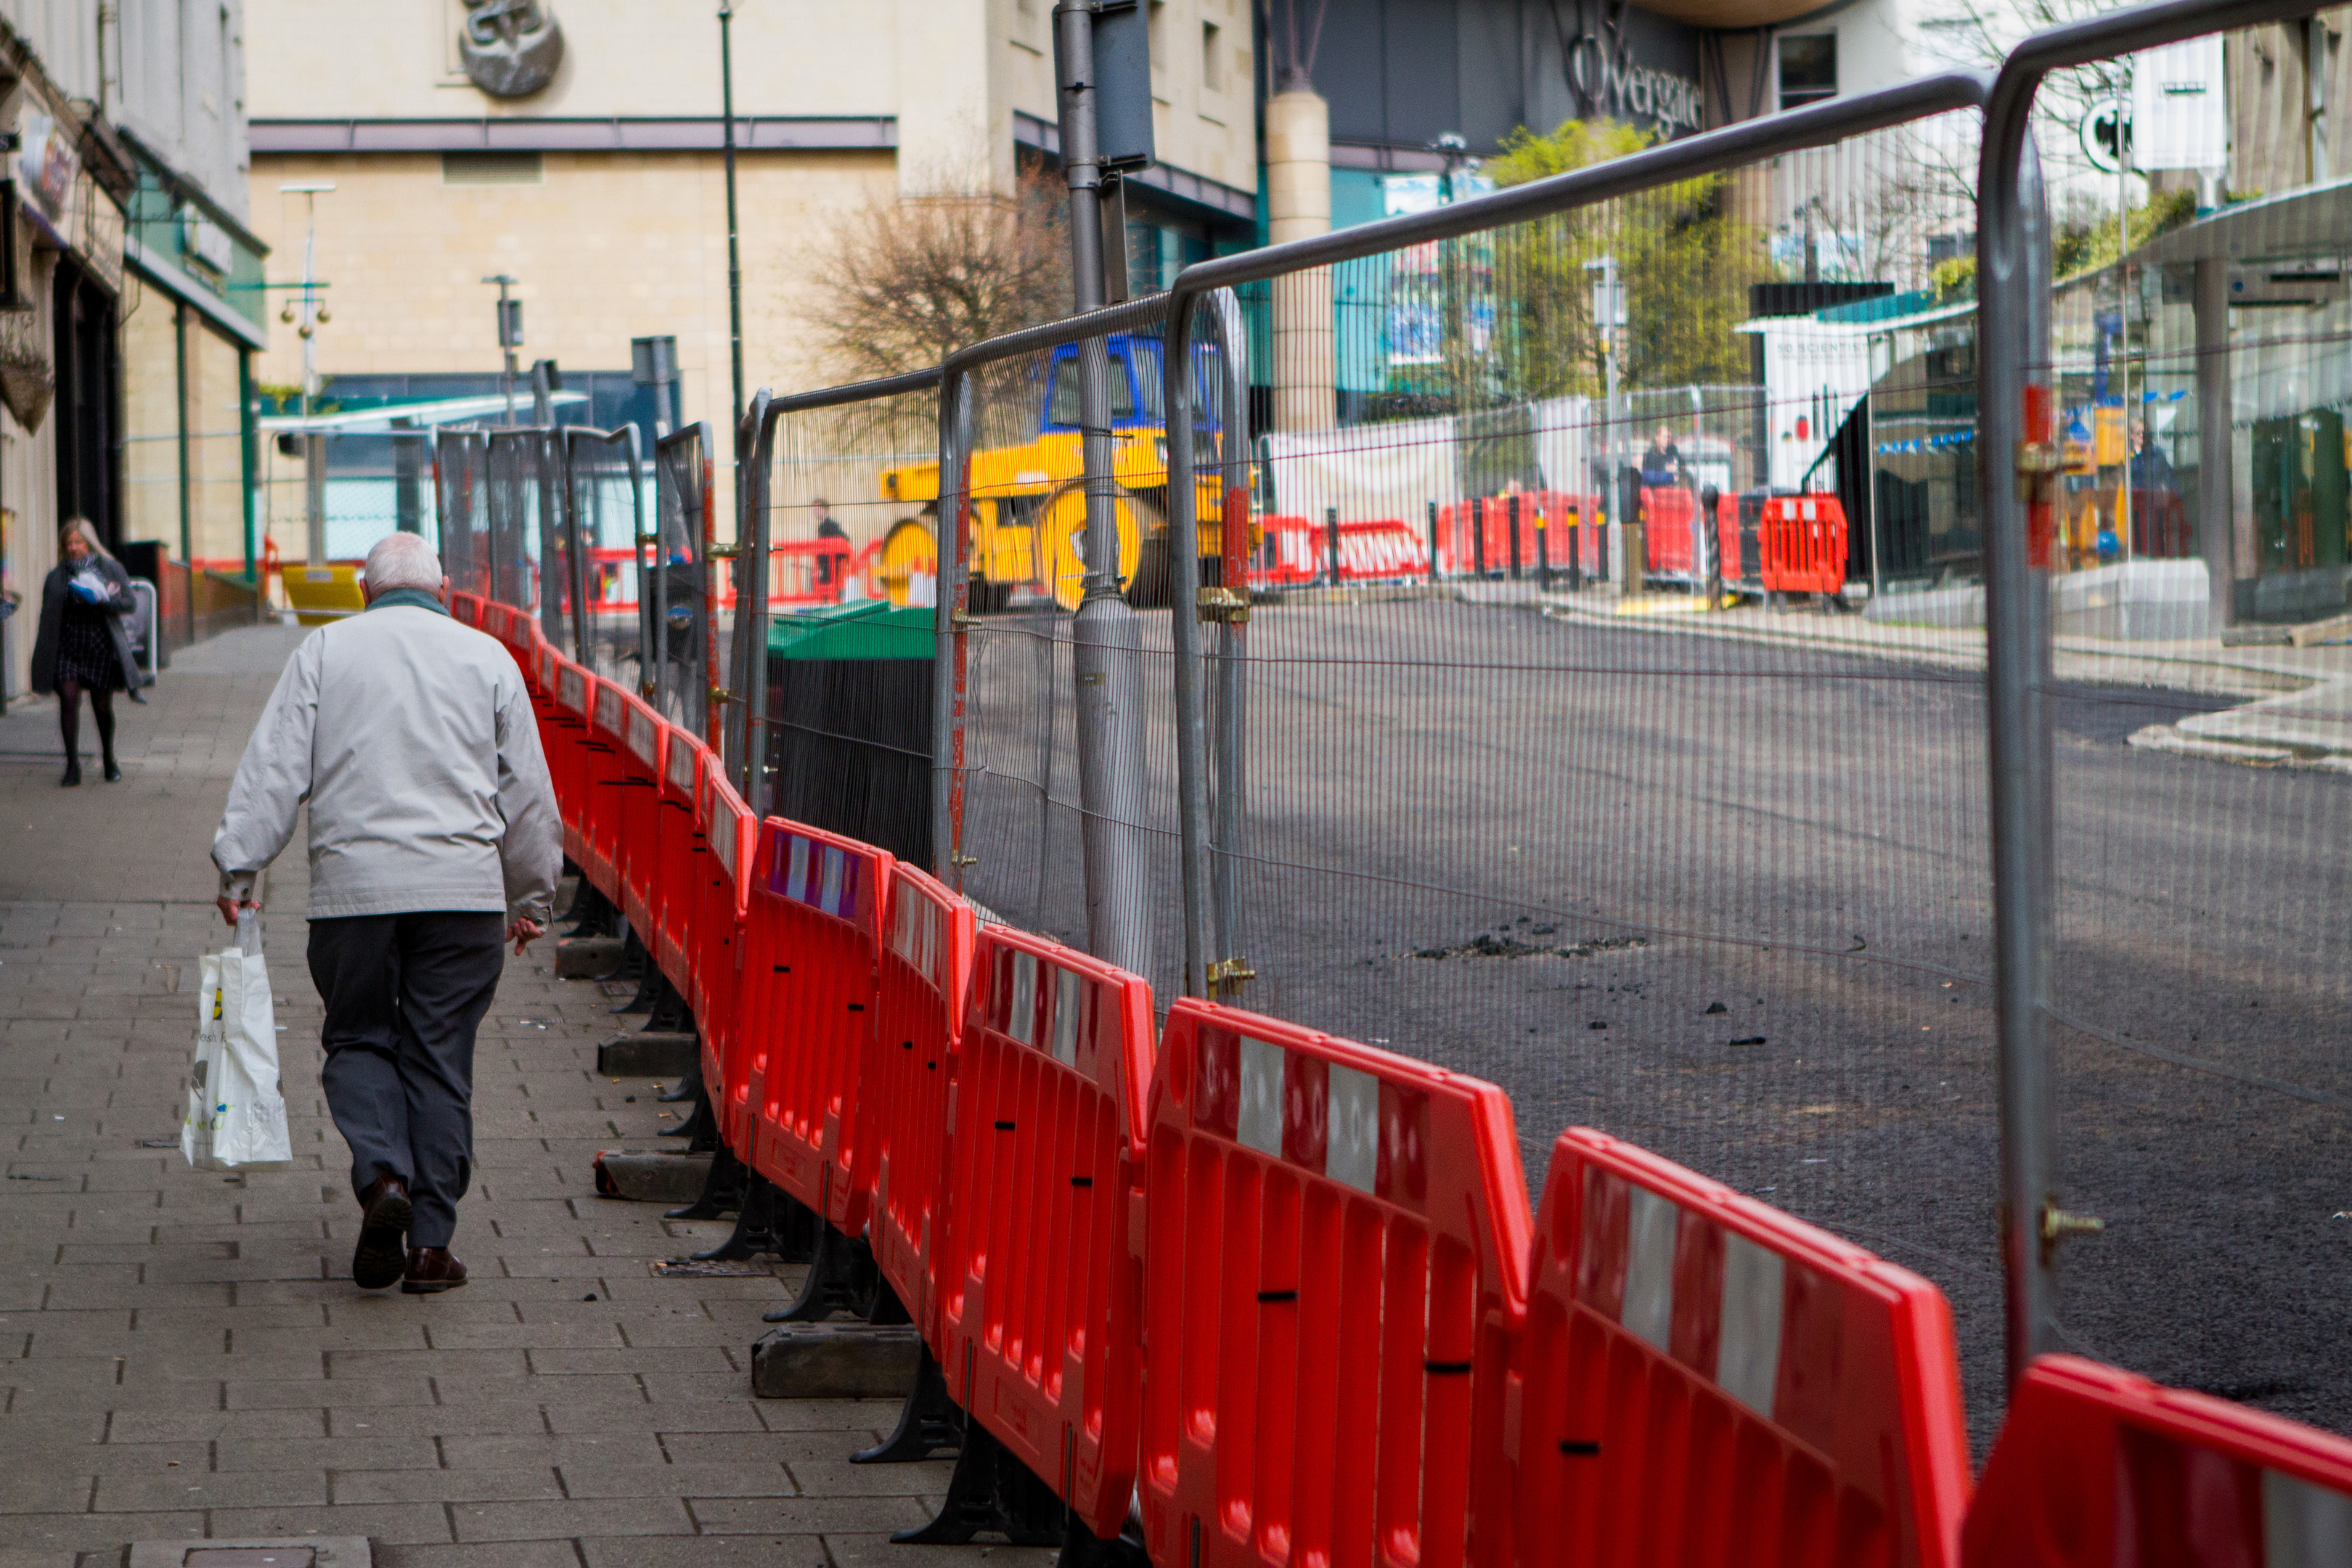 The roadworks have shut down large parts of Dundee city centre.